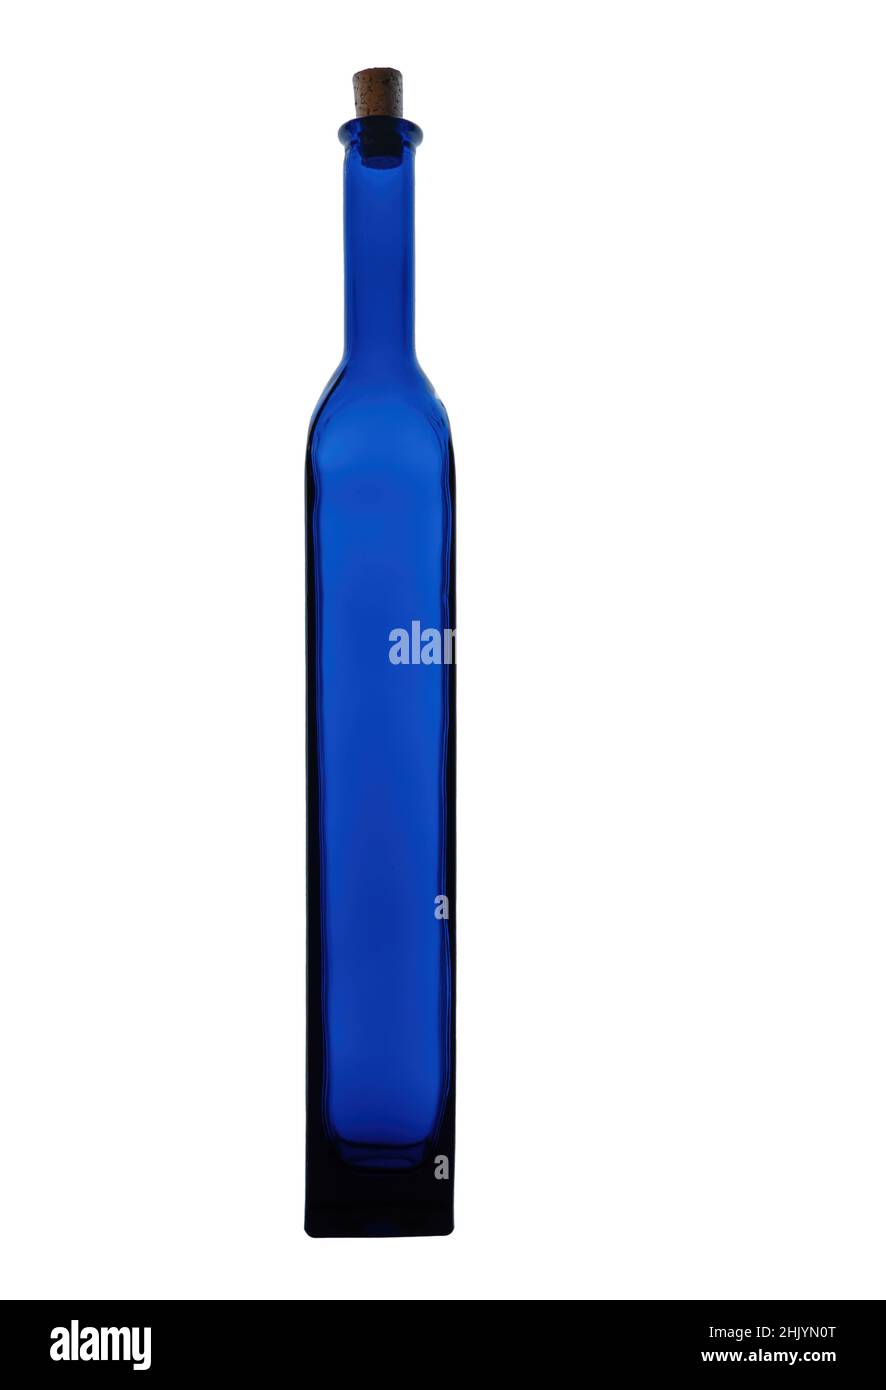 https://c8.alamy.com/comp/2HJYN0T/tall-thin-bright-blue-glass-bottle-isolated-on-white-background-2HJYN0T.jpg